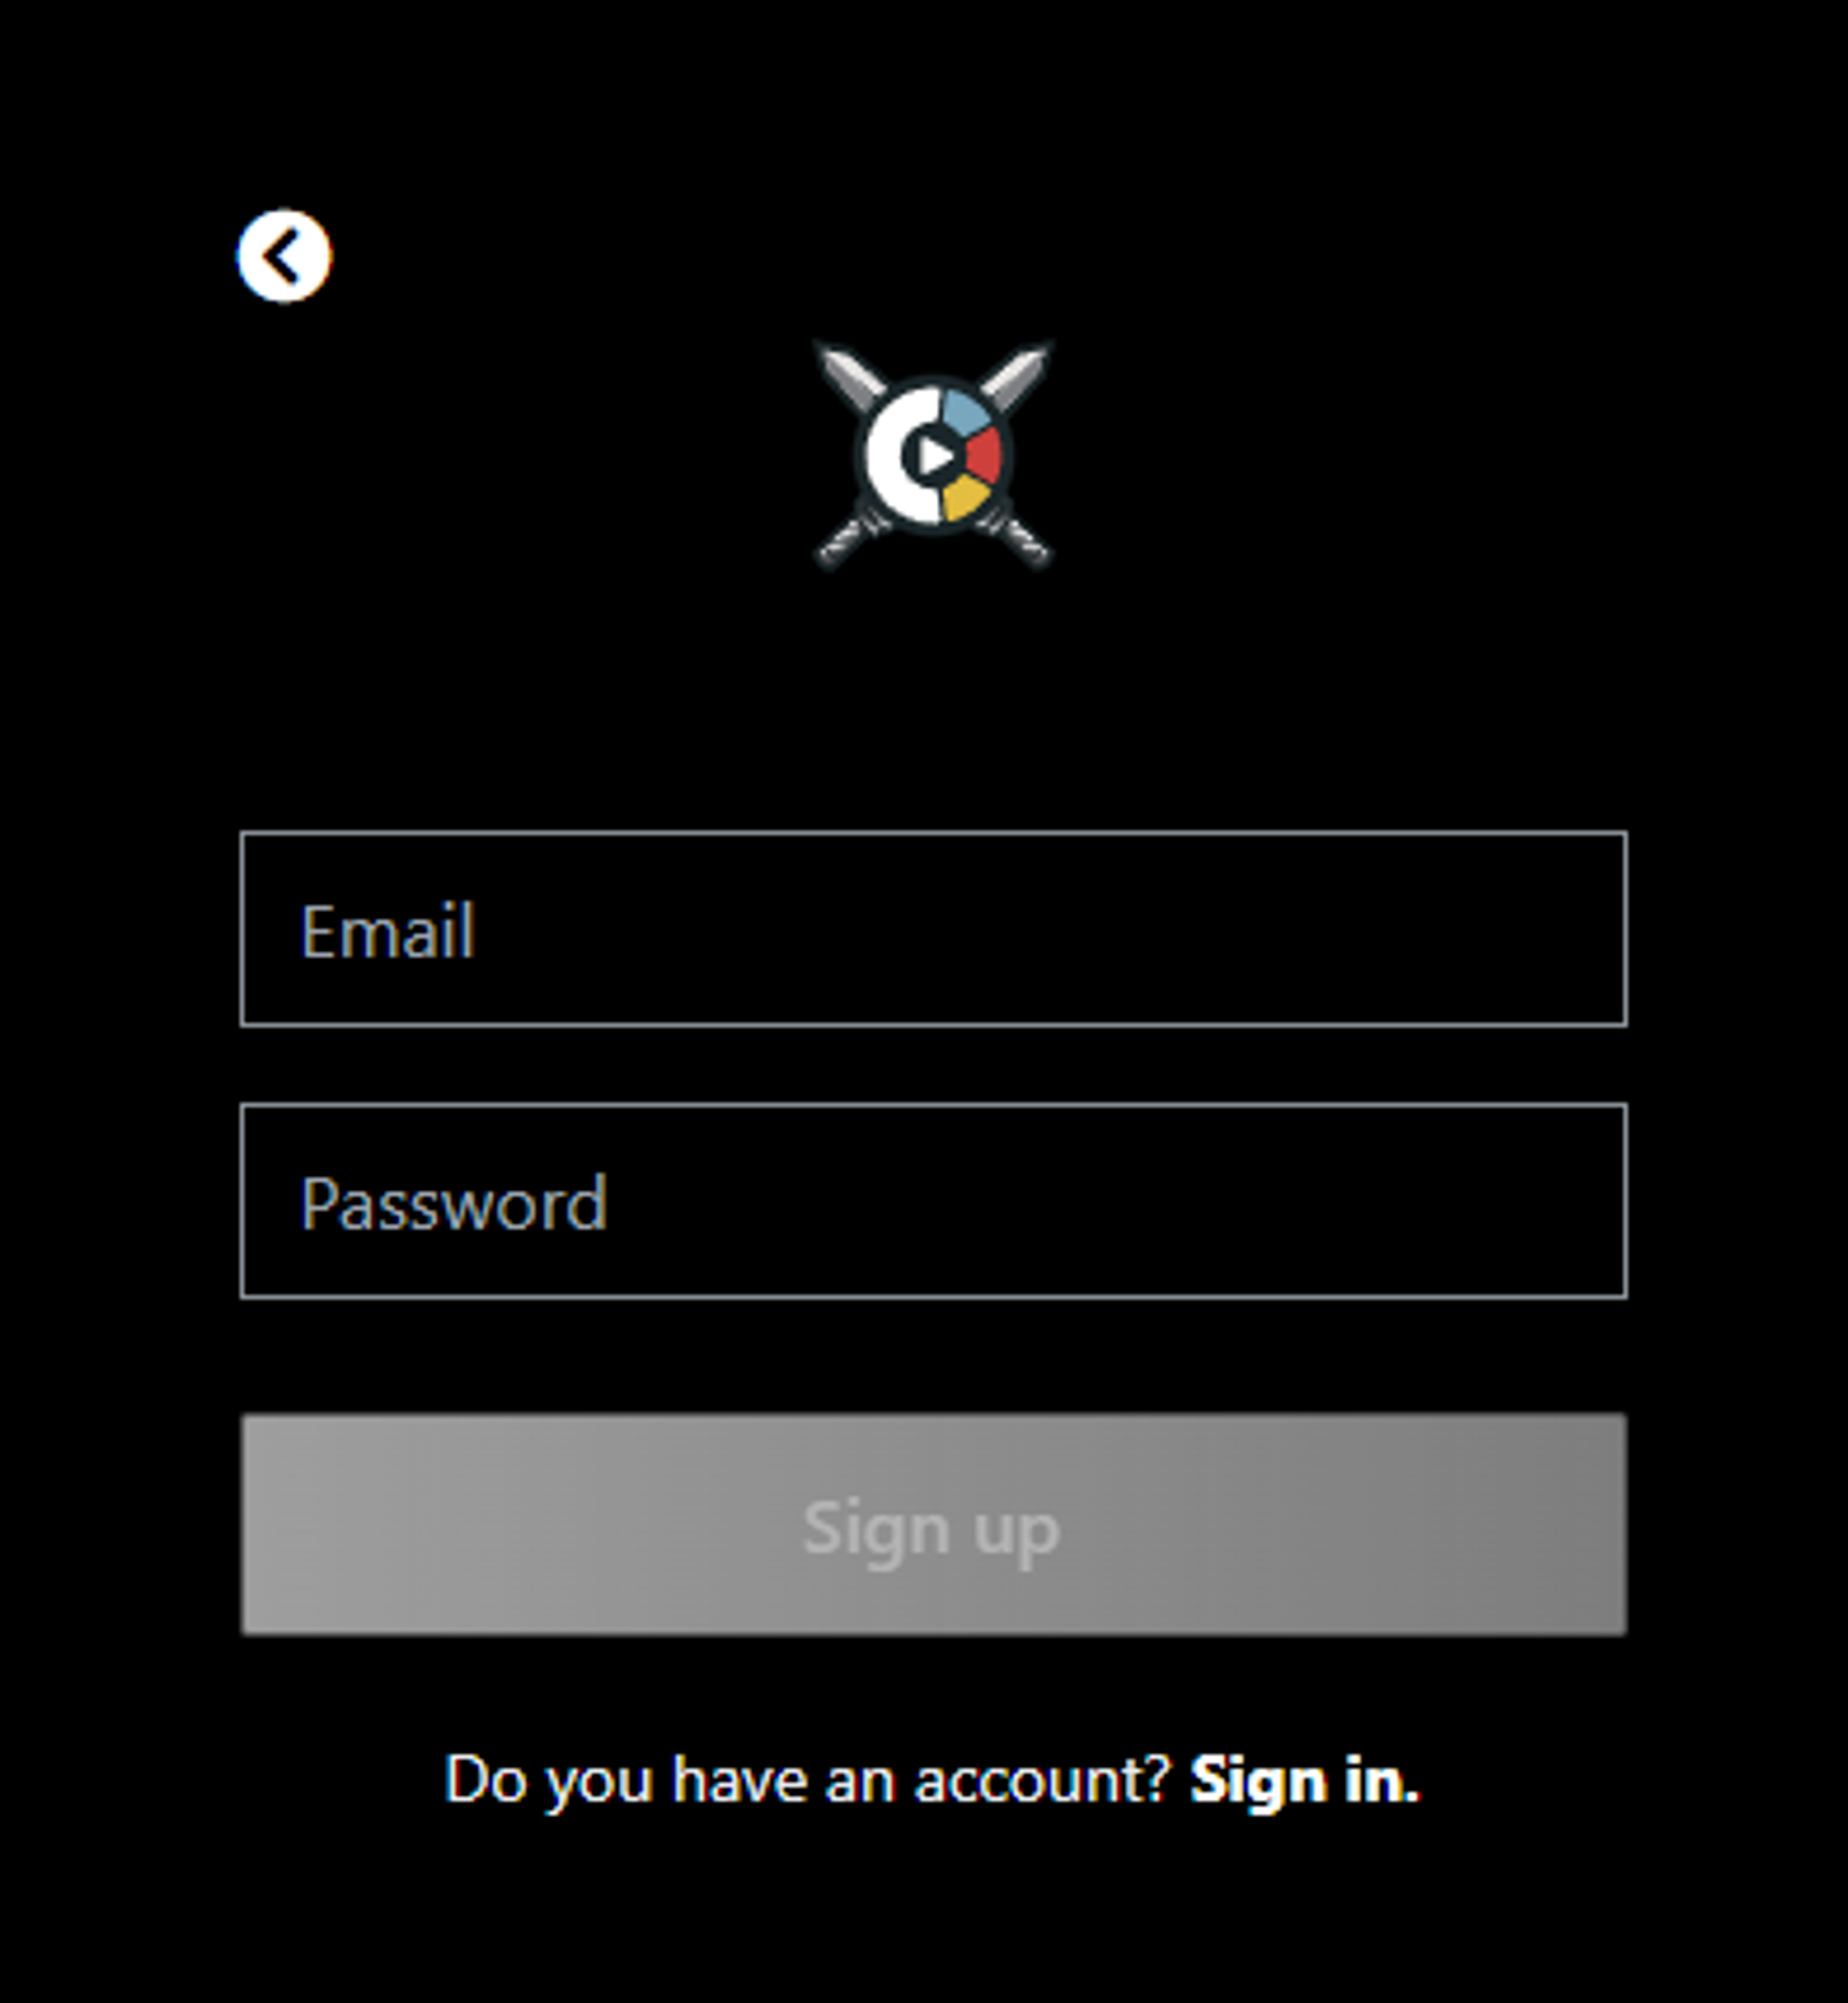 With a email and password combination 